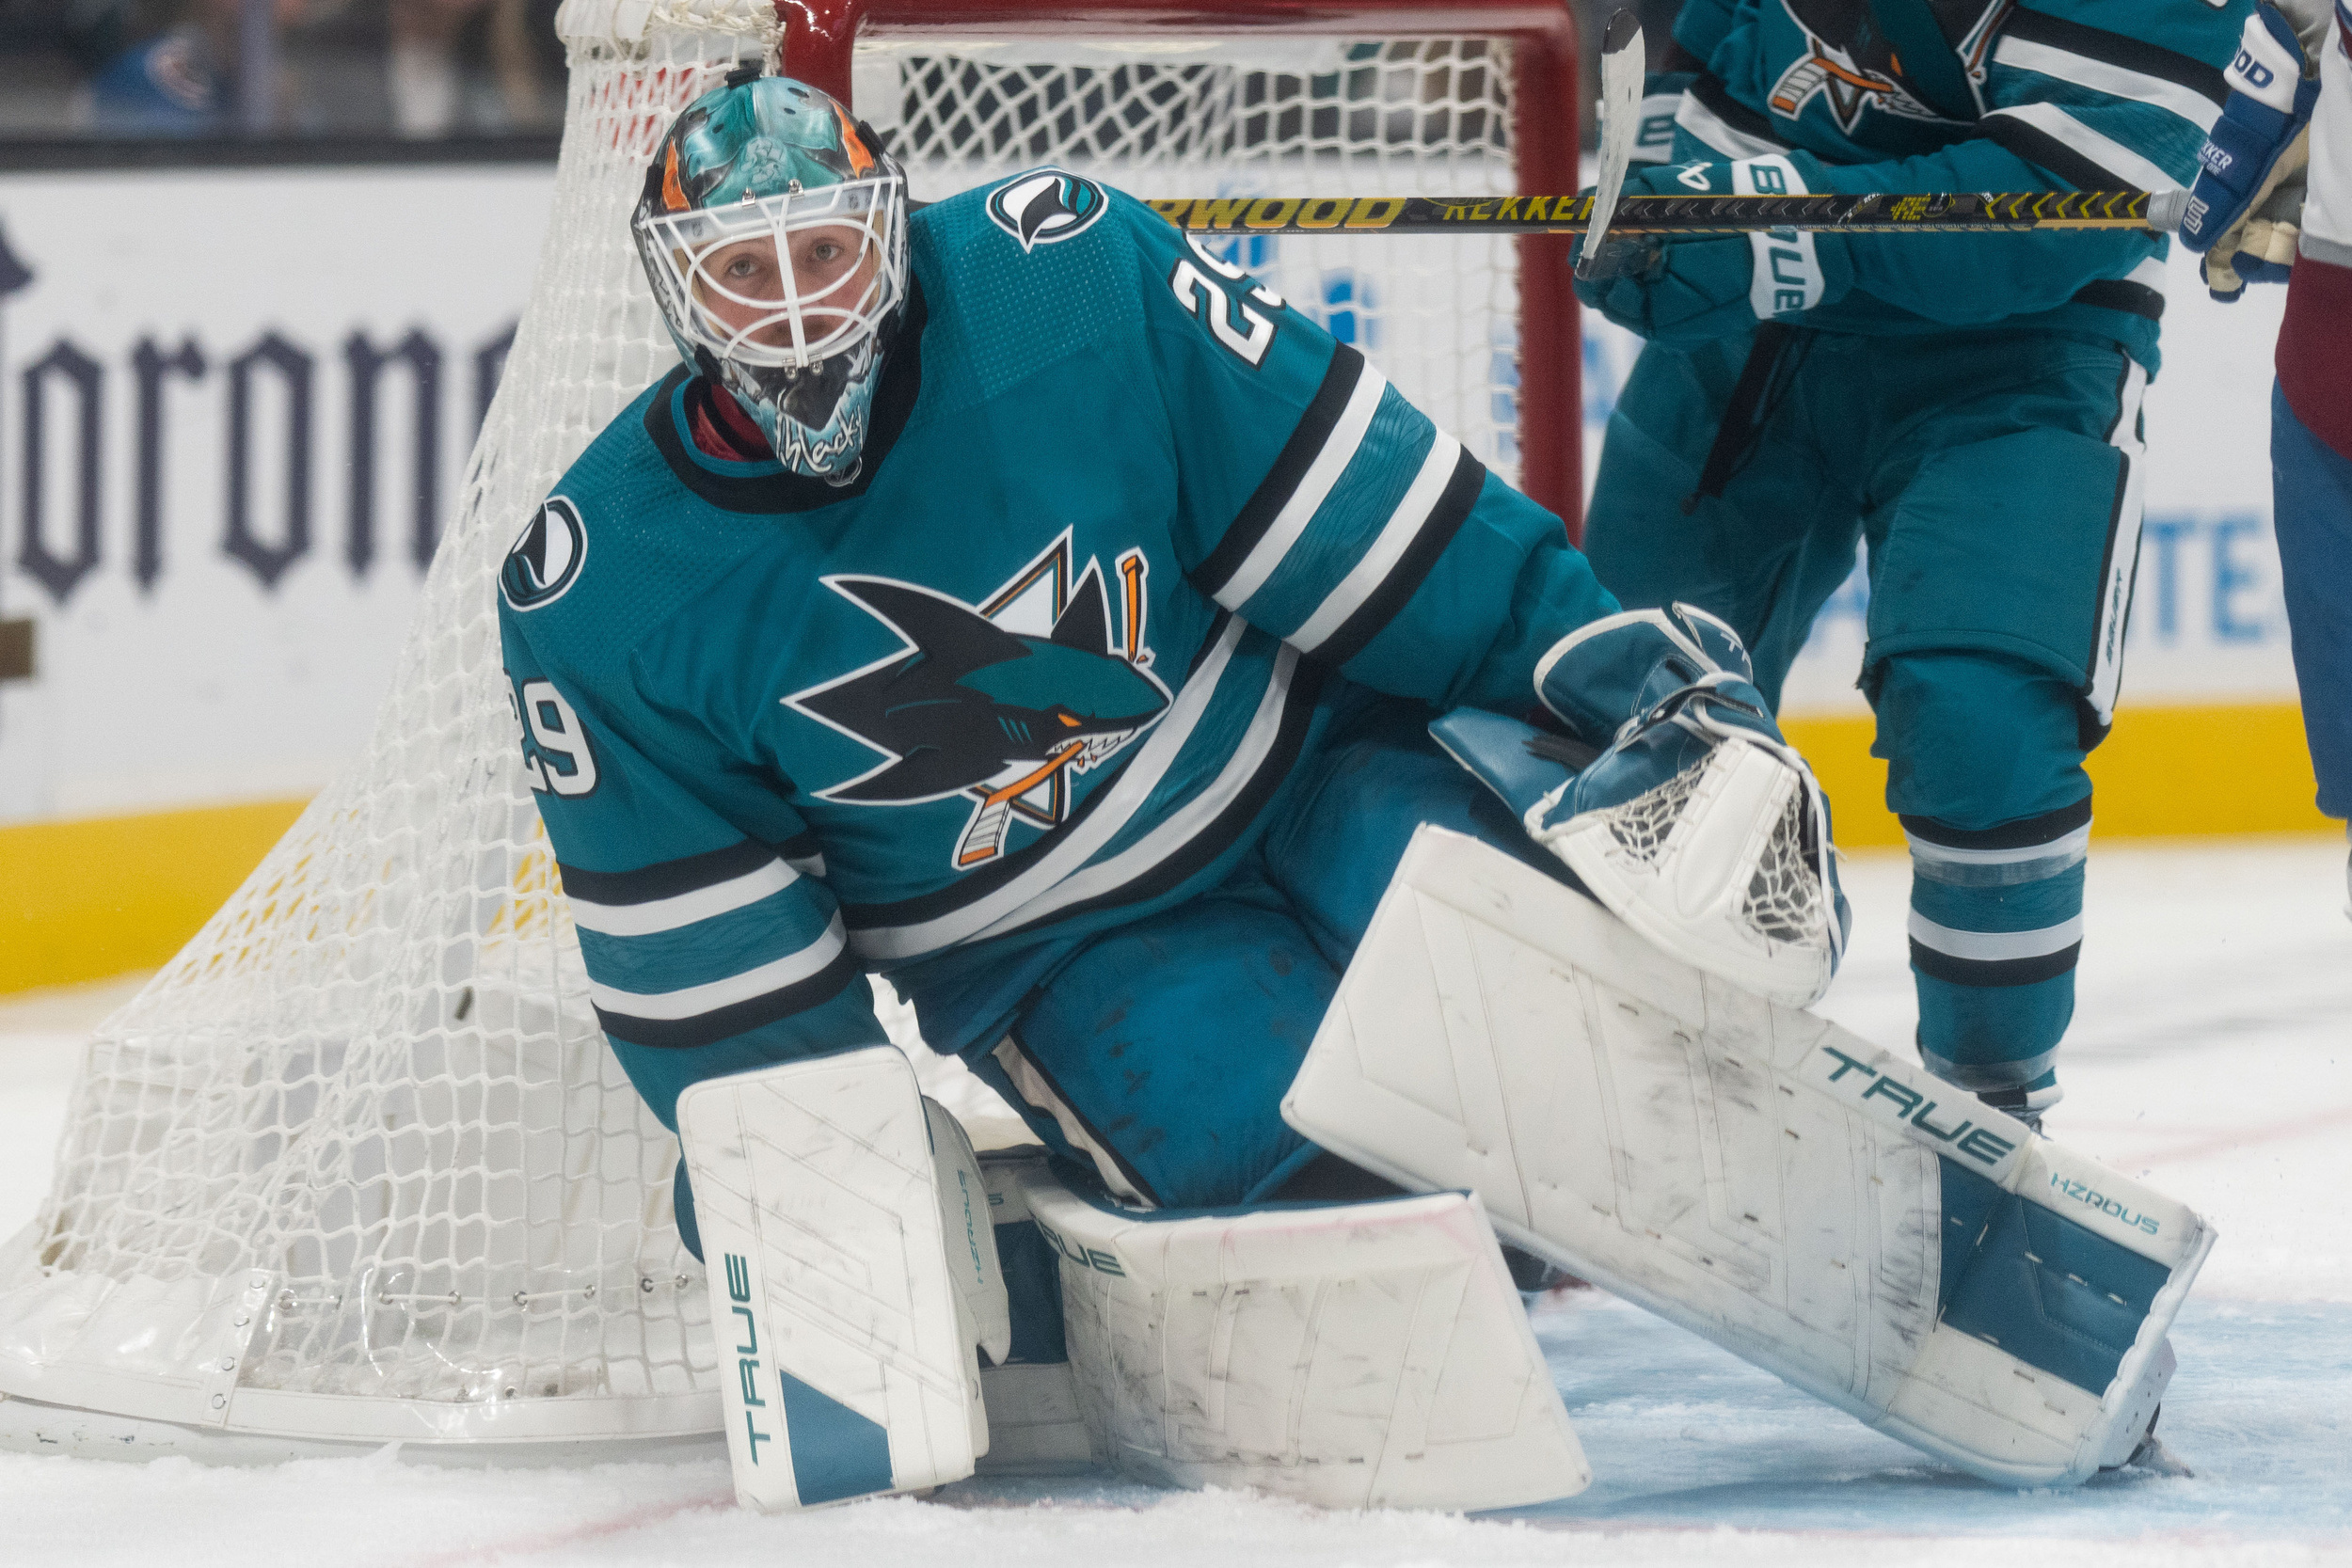 Blackwood Strong in Net Late as Devils Top Sharks 2-1 for Third